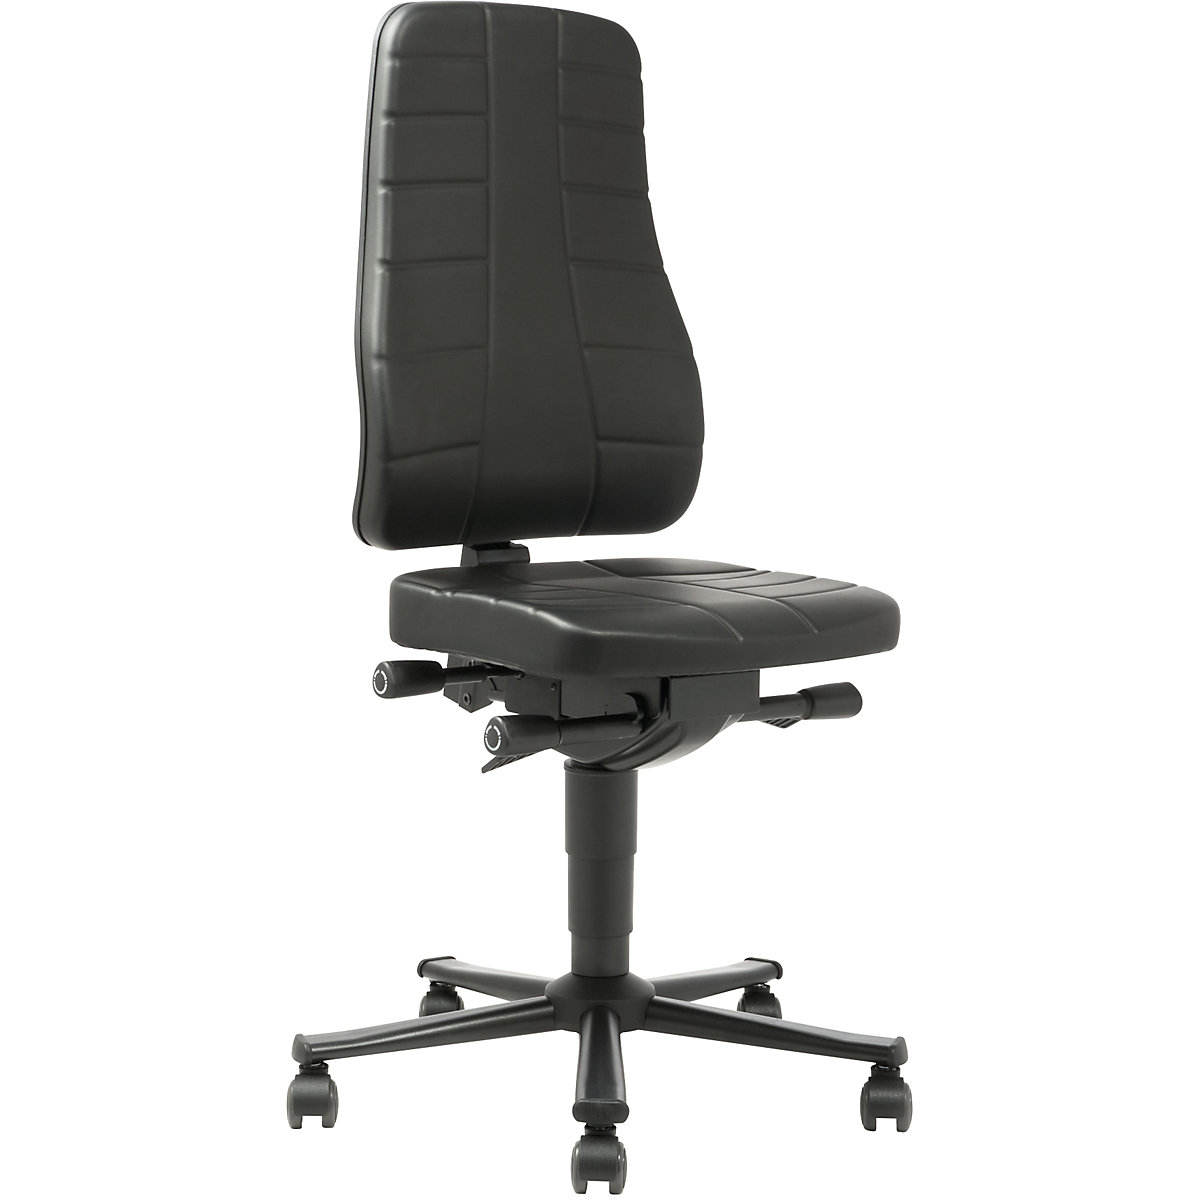 All-in-one industrial swivel chair - bimos